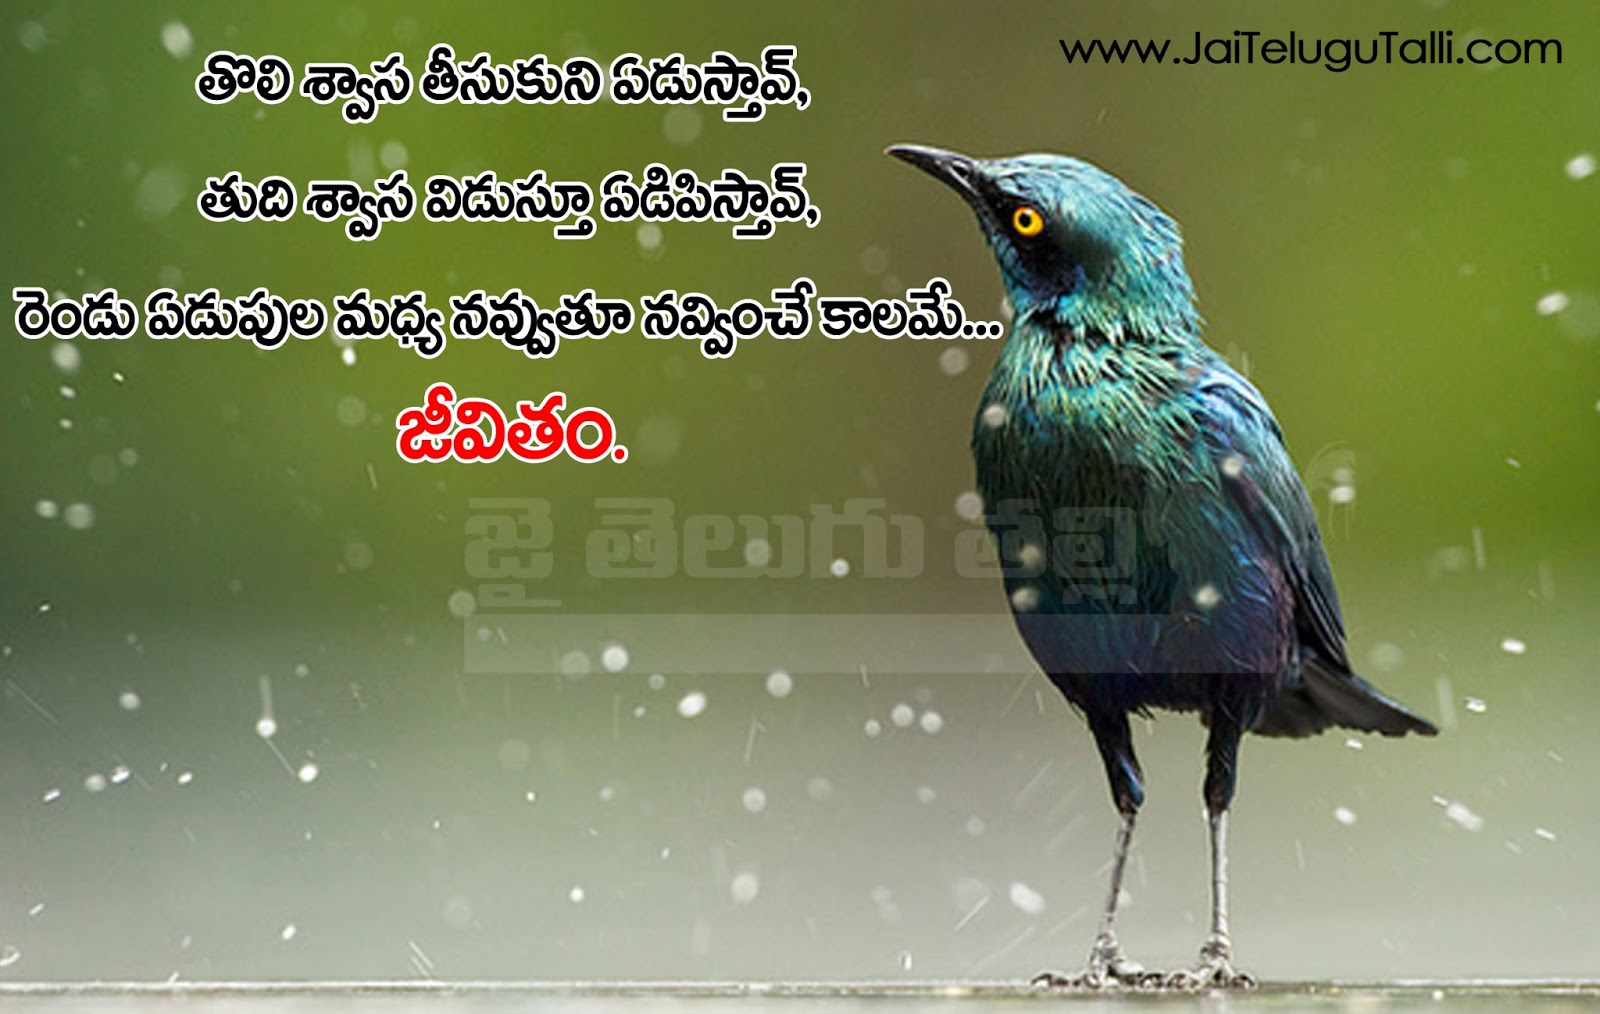 Here is a Telugu Life Quotes Life Thoughts in Telugu Best Life Thoughts and